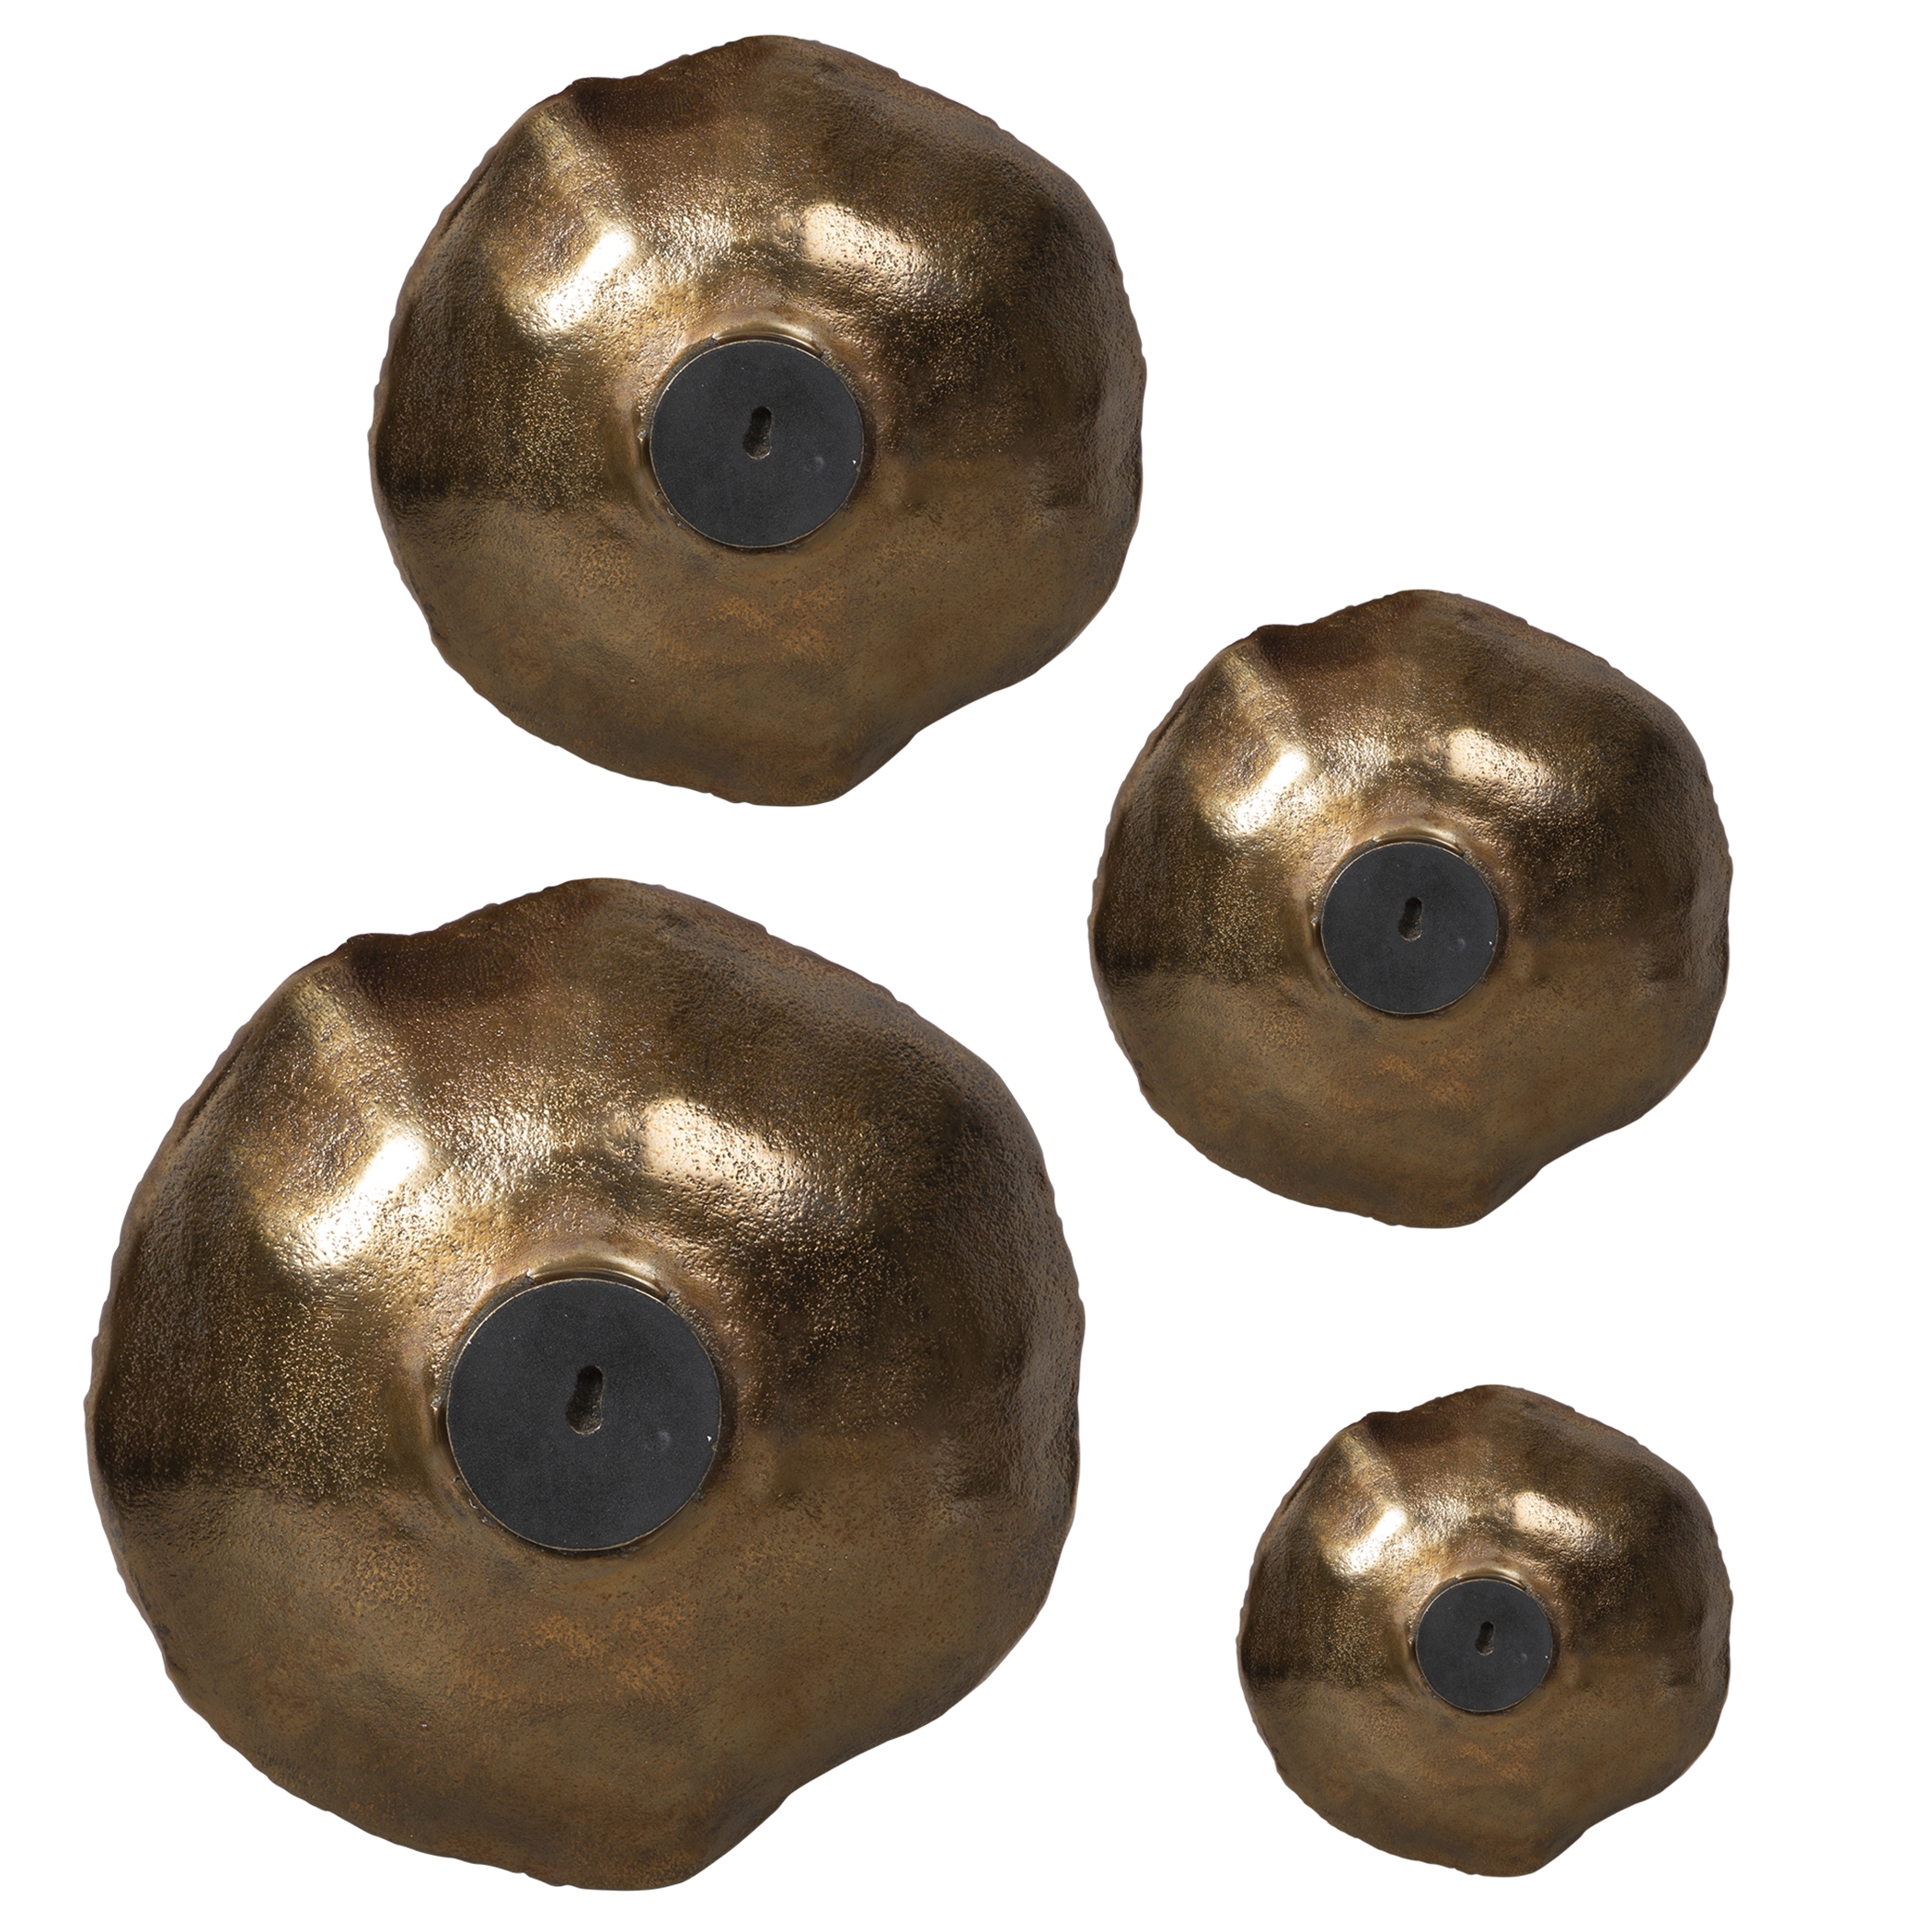 Lucky Coins Brass Wall Bowls, S/4 - Image 3